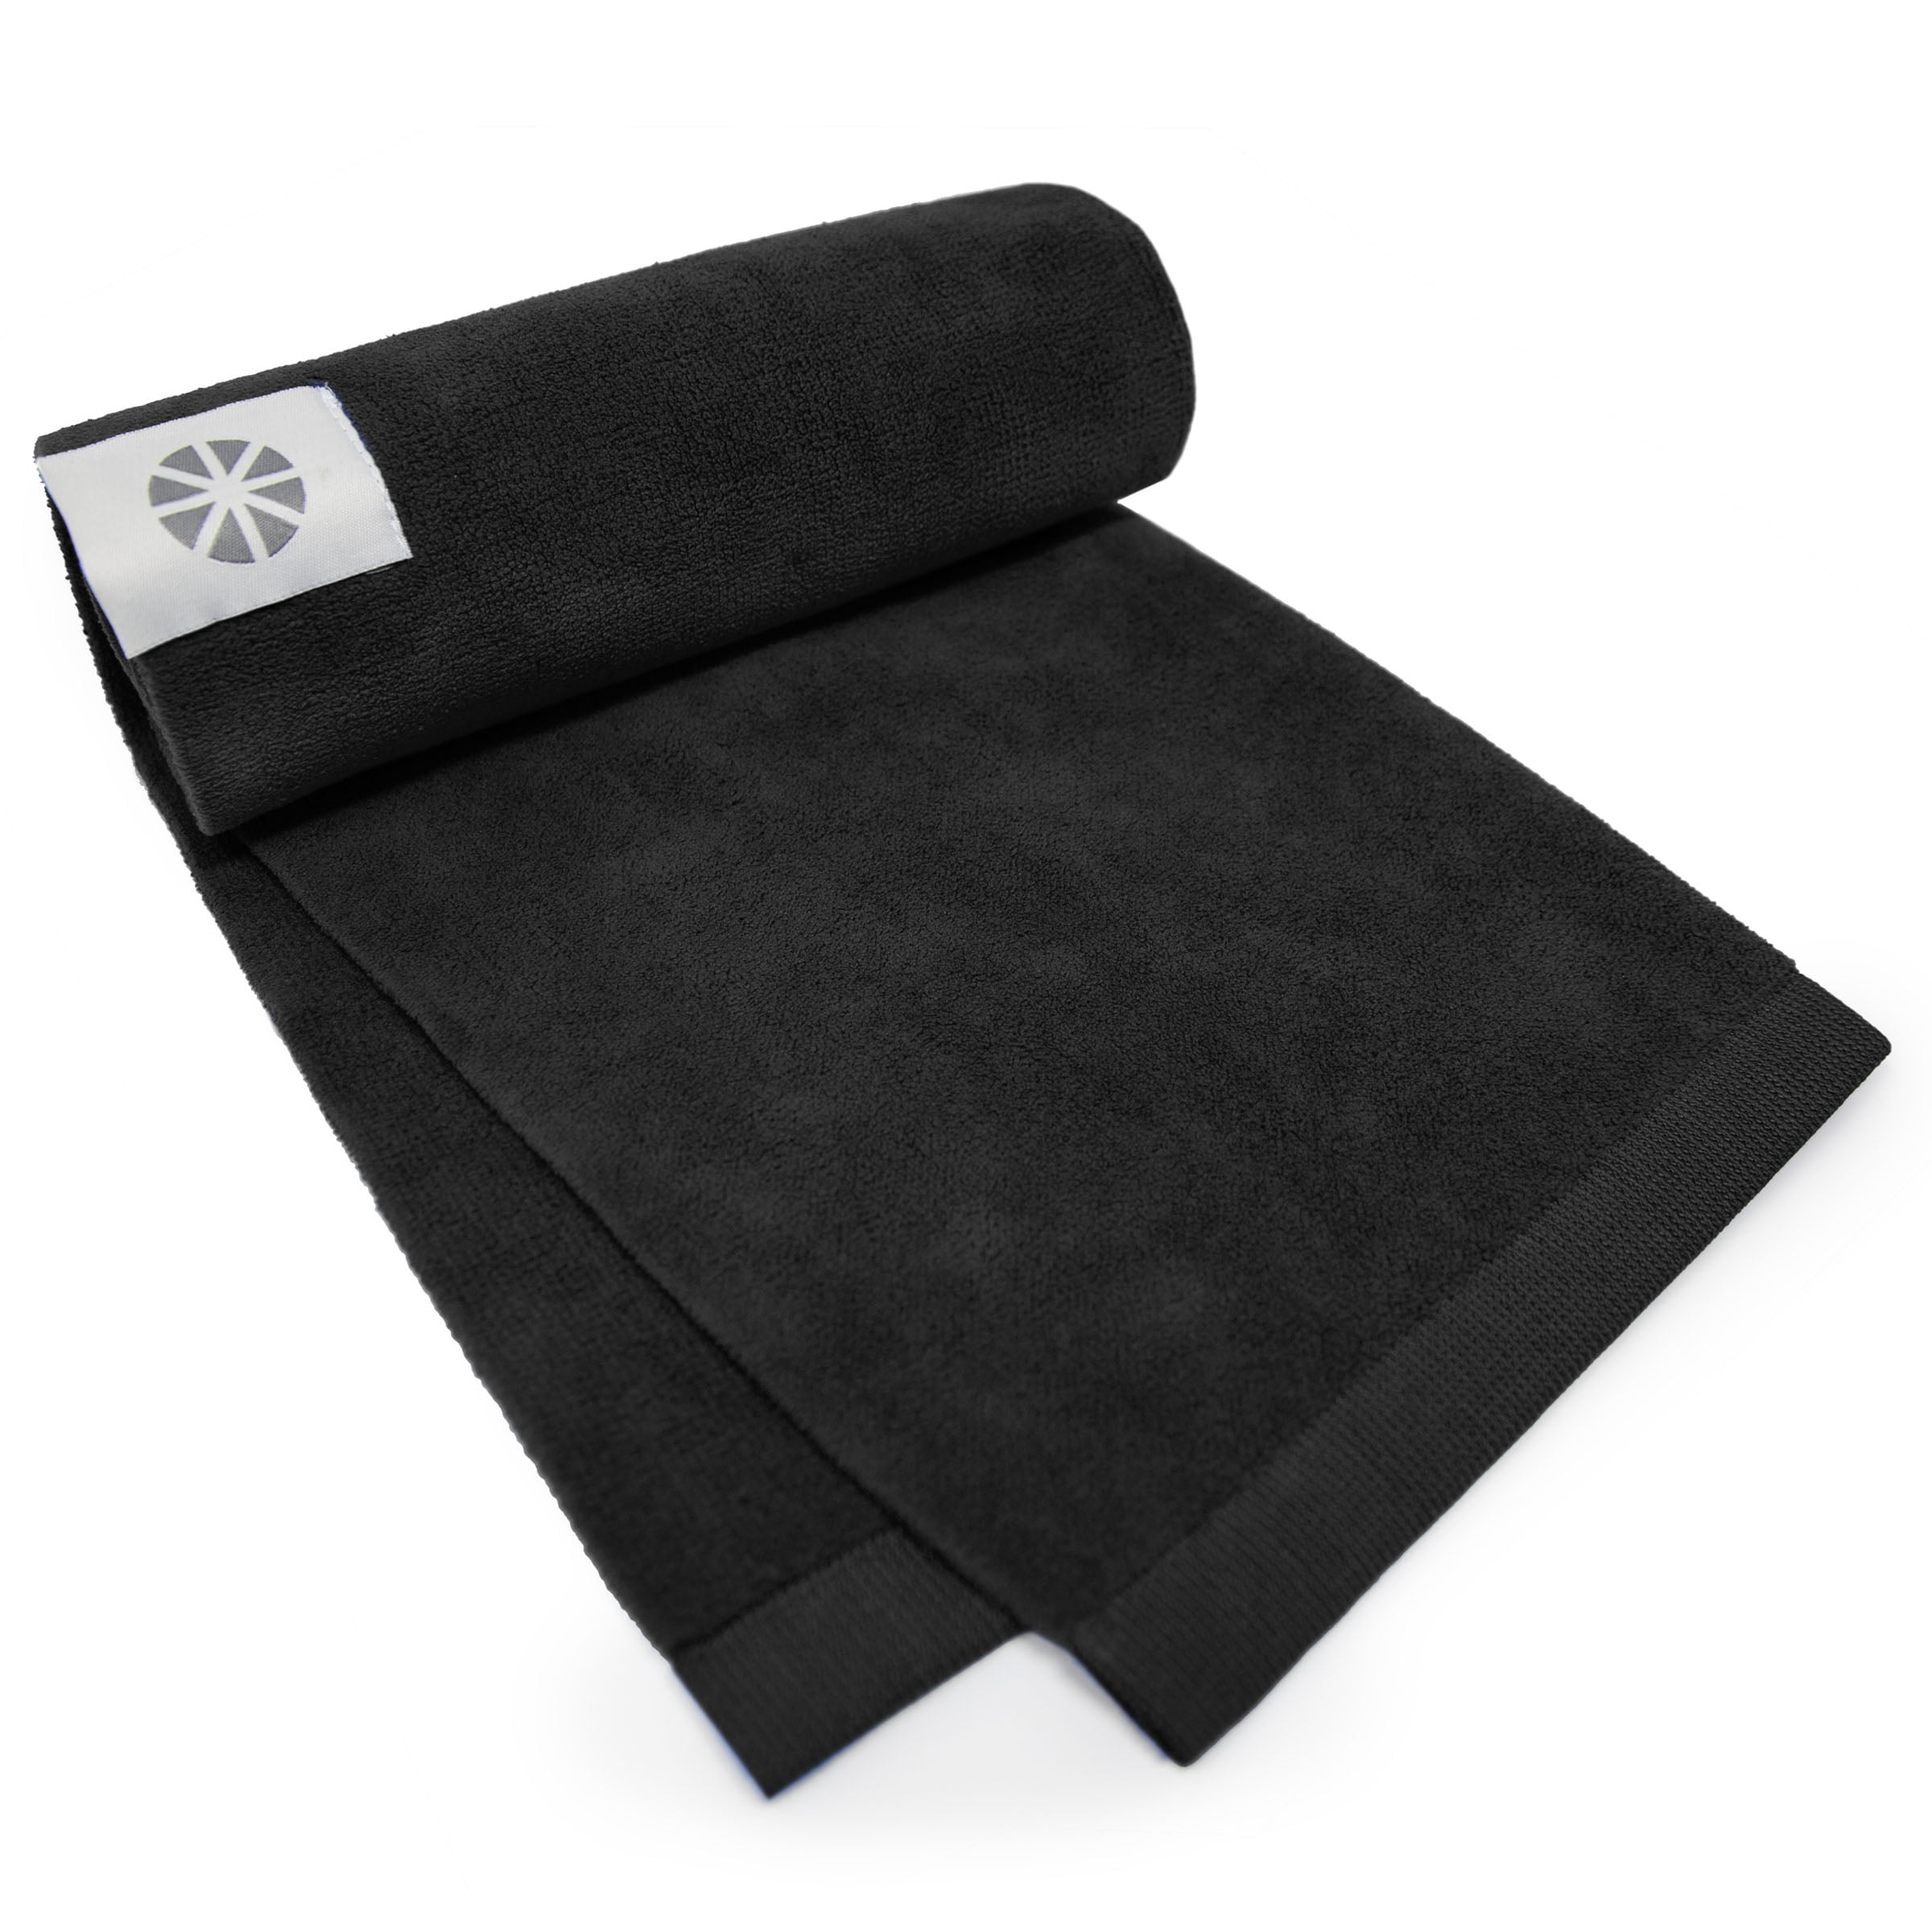 The Towel, Unisex Work Out Accessories